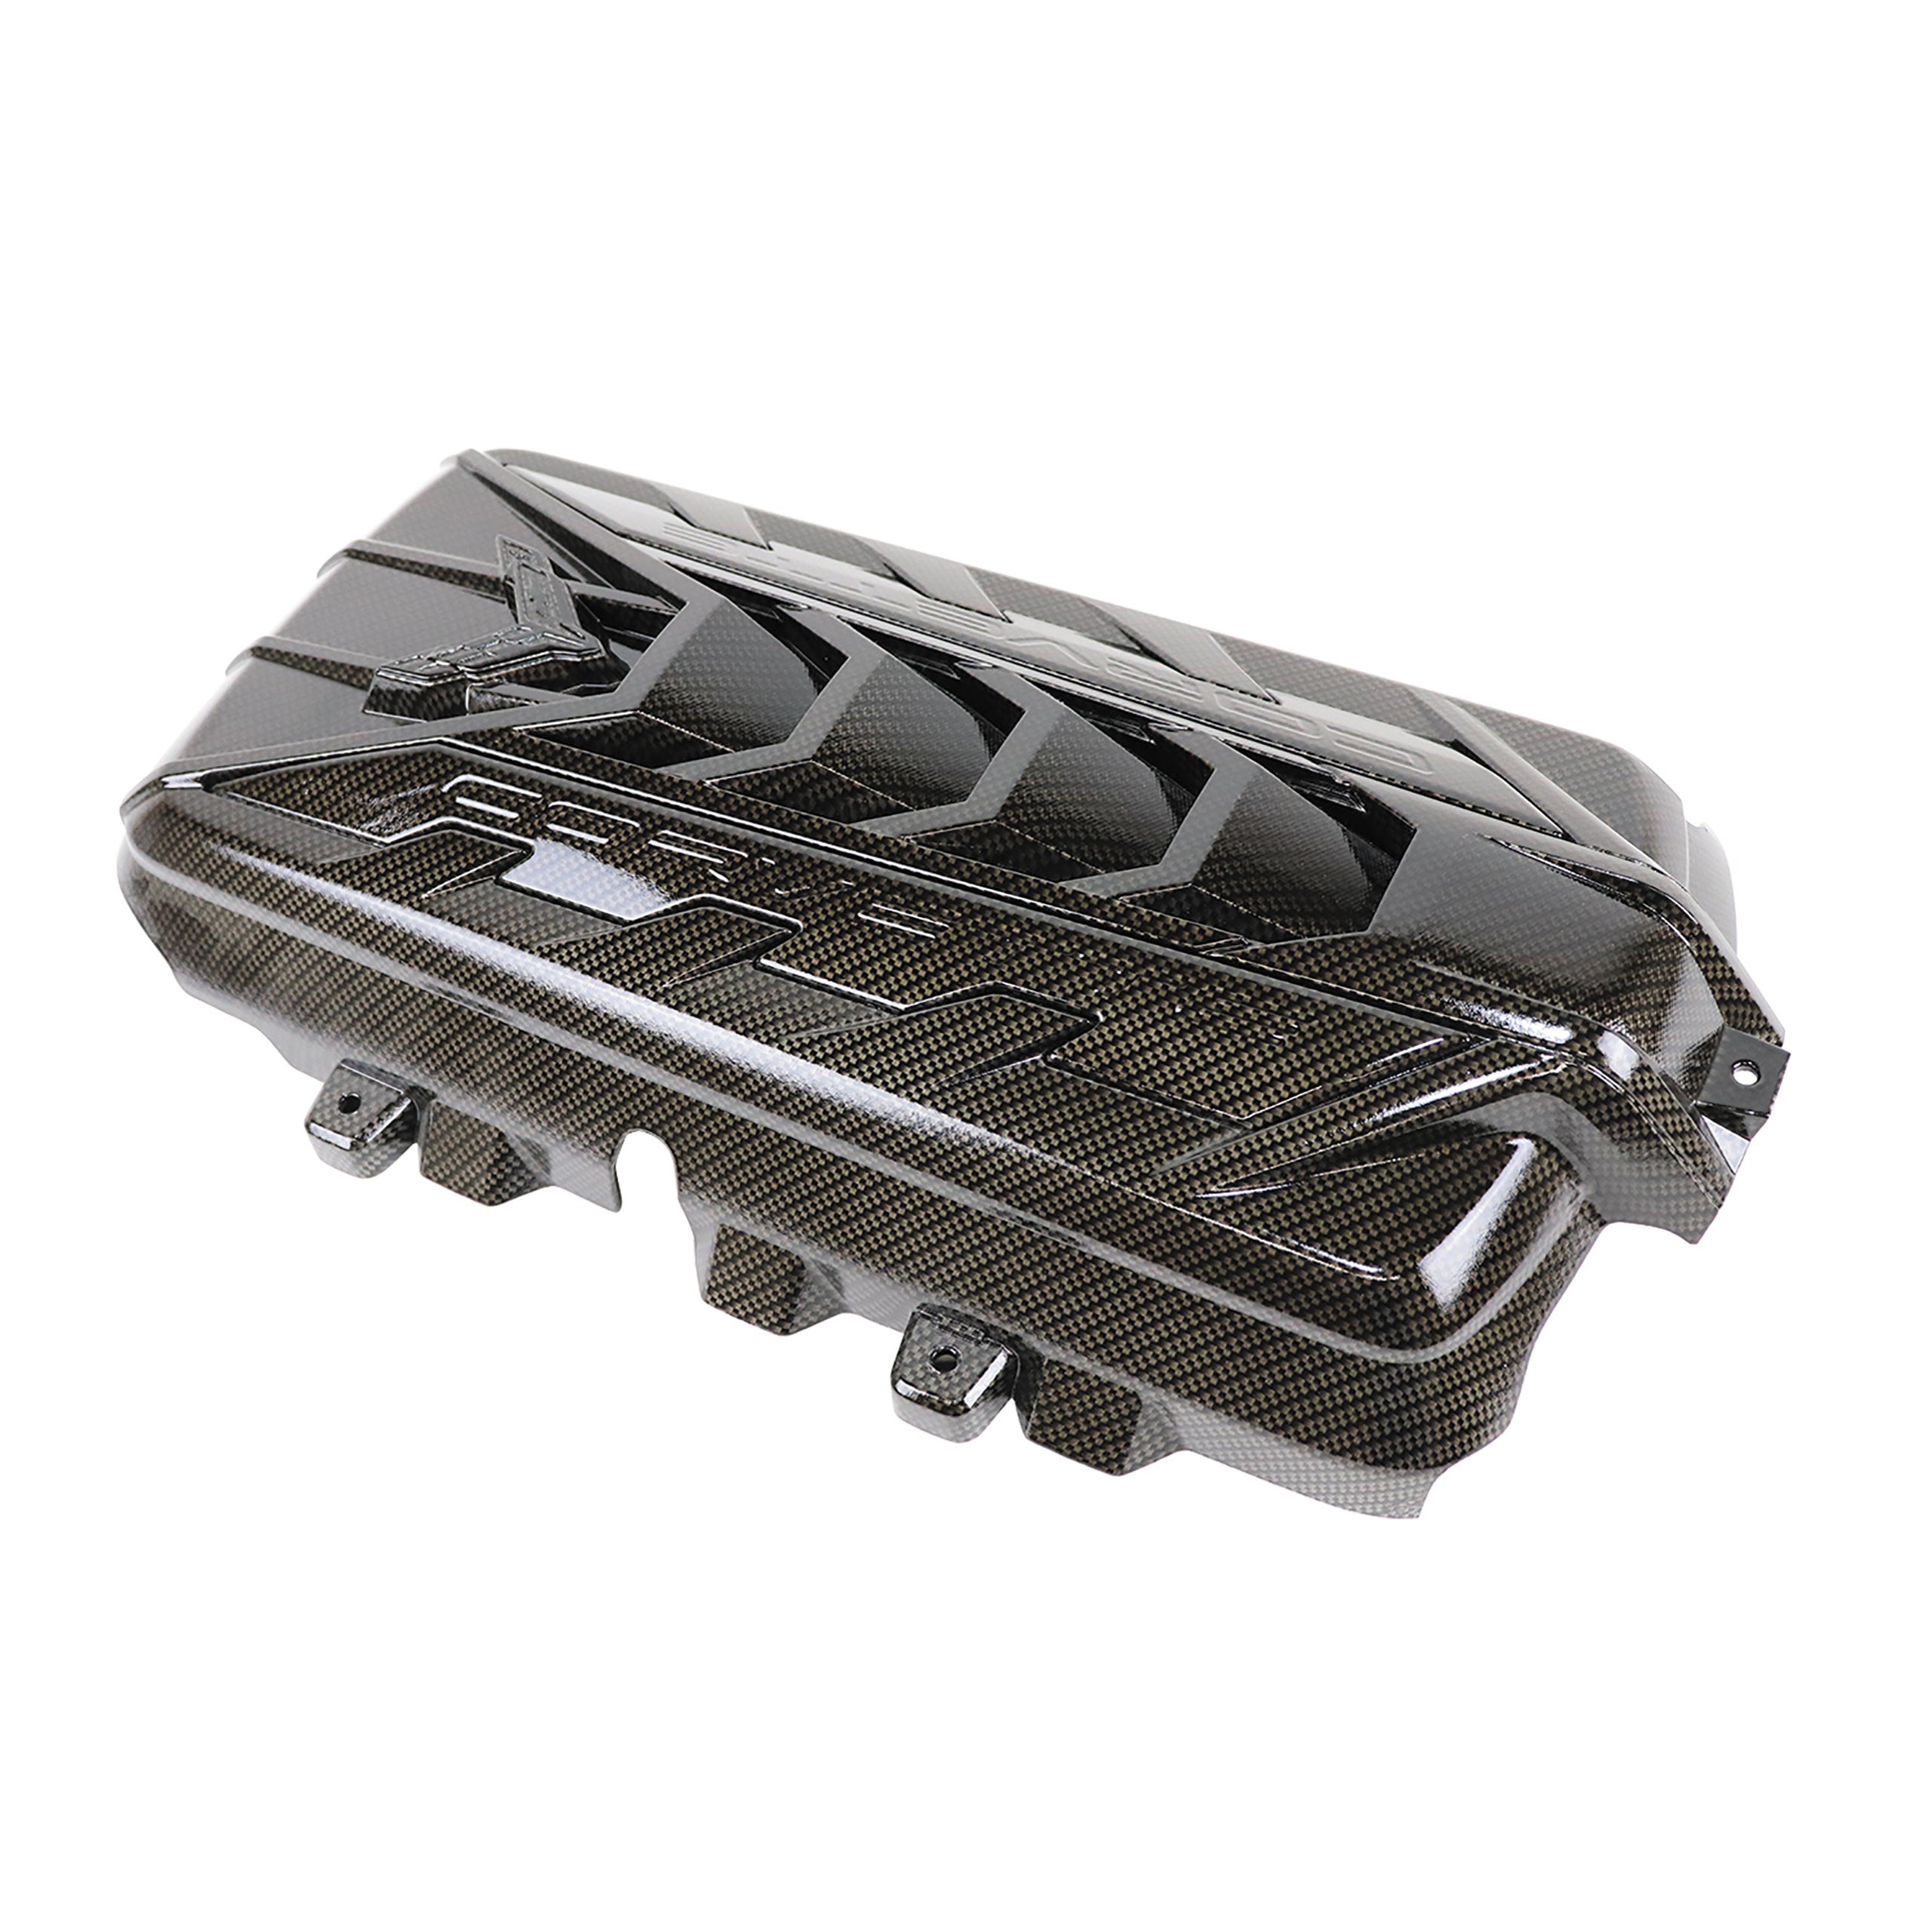 Hydro-Carbon-LT2-Engine-Cover---Special-Order-Only-201521-Corvette-Store-Online